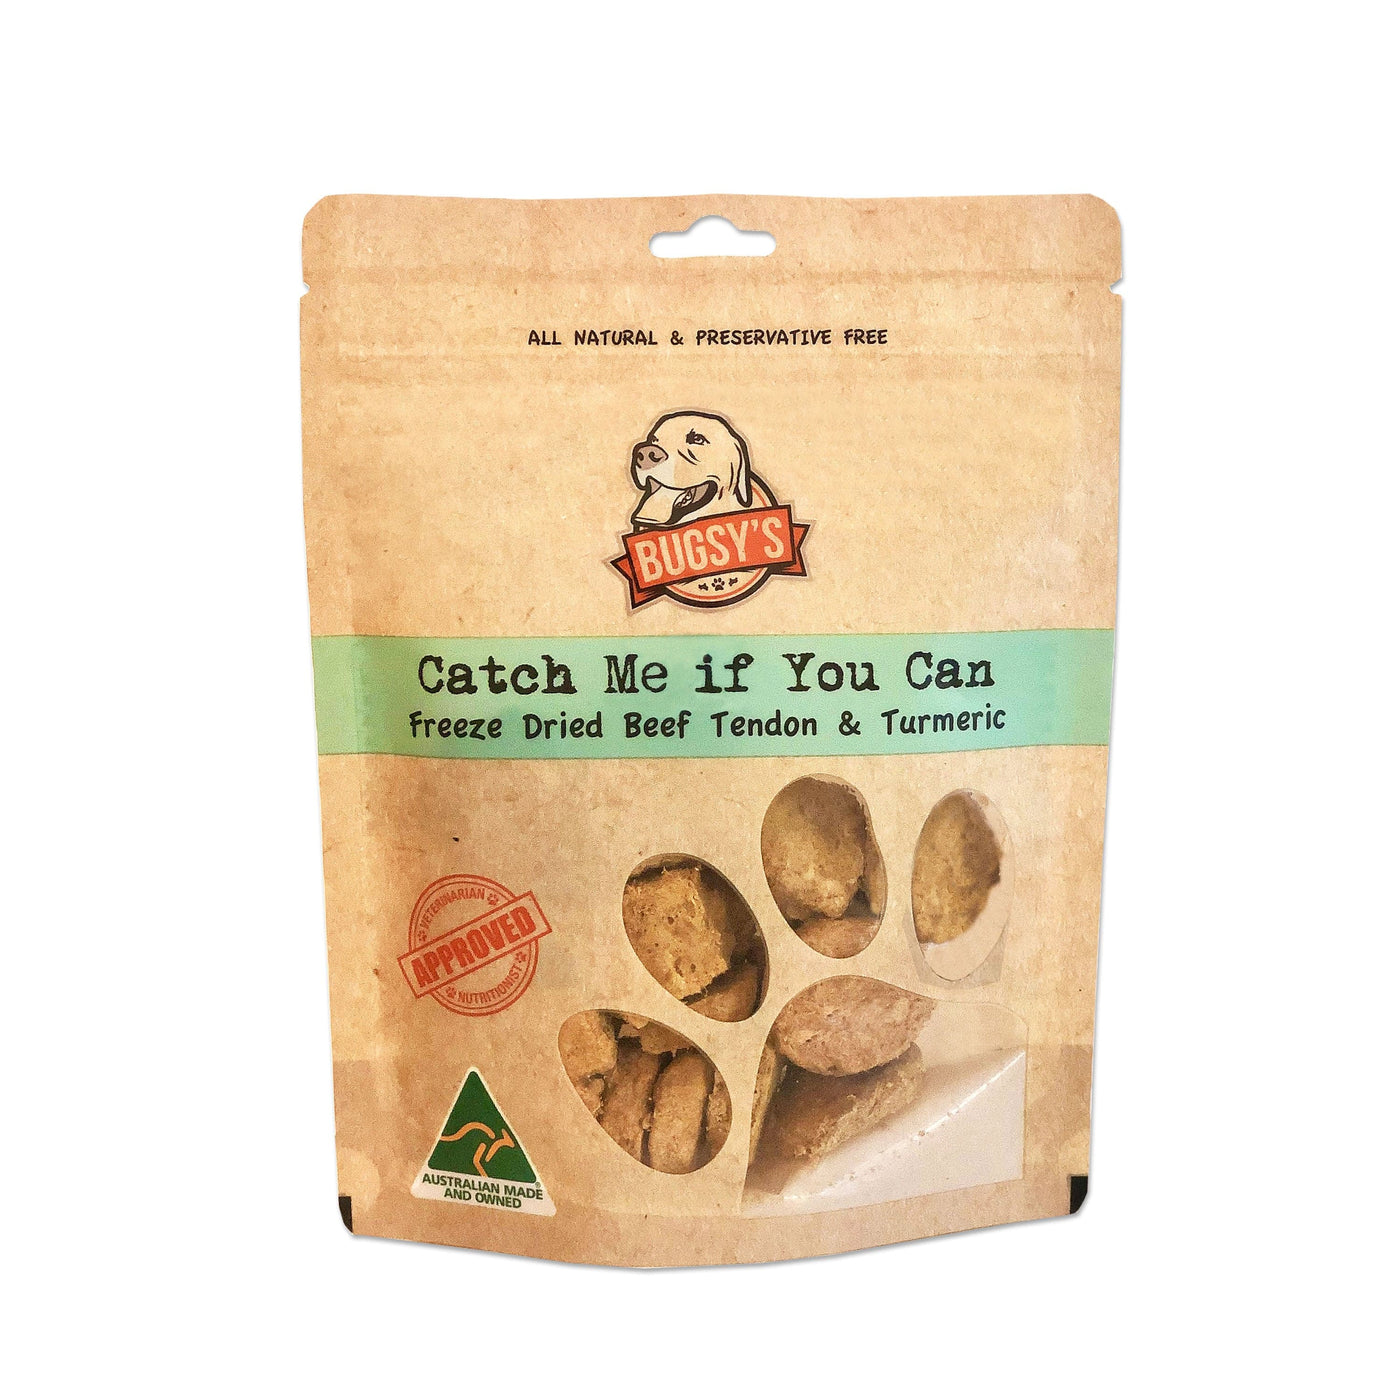 Bugsy catch Me if you can beef tendon functional treats